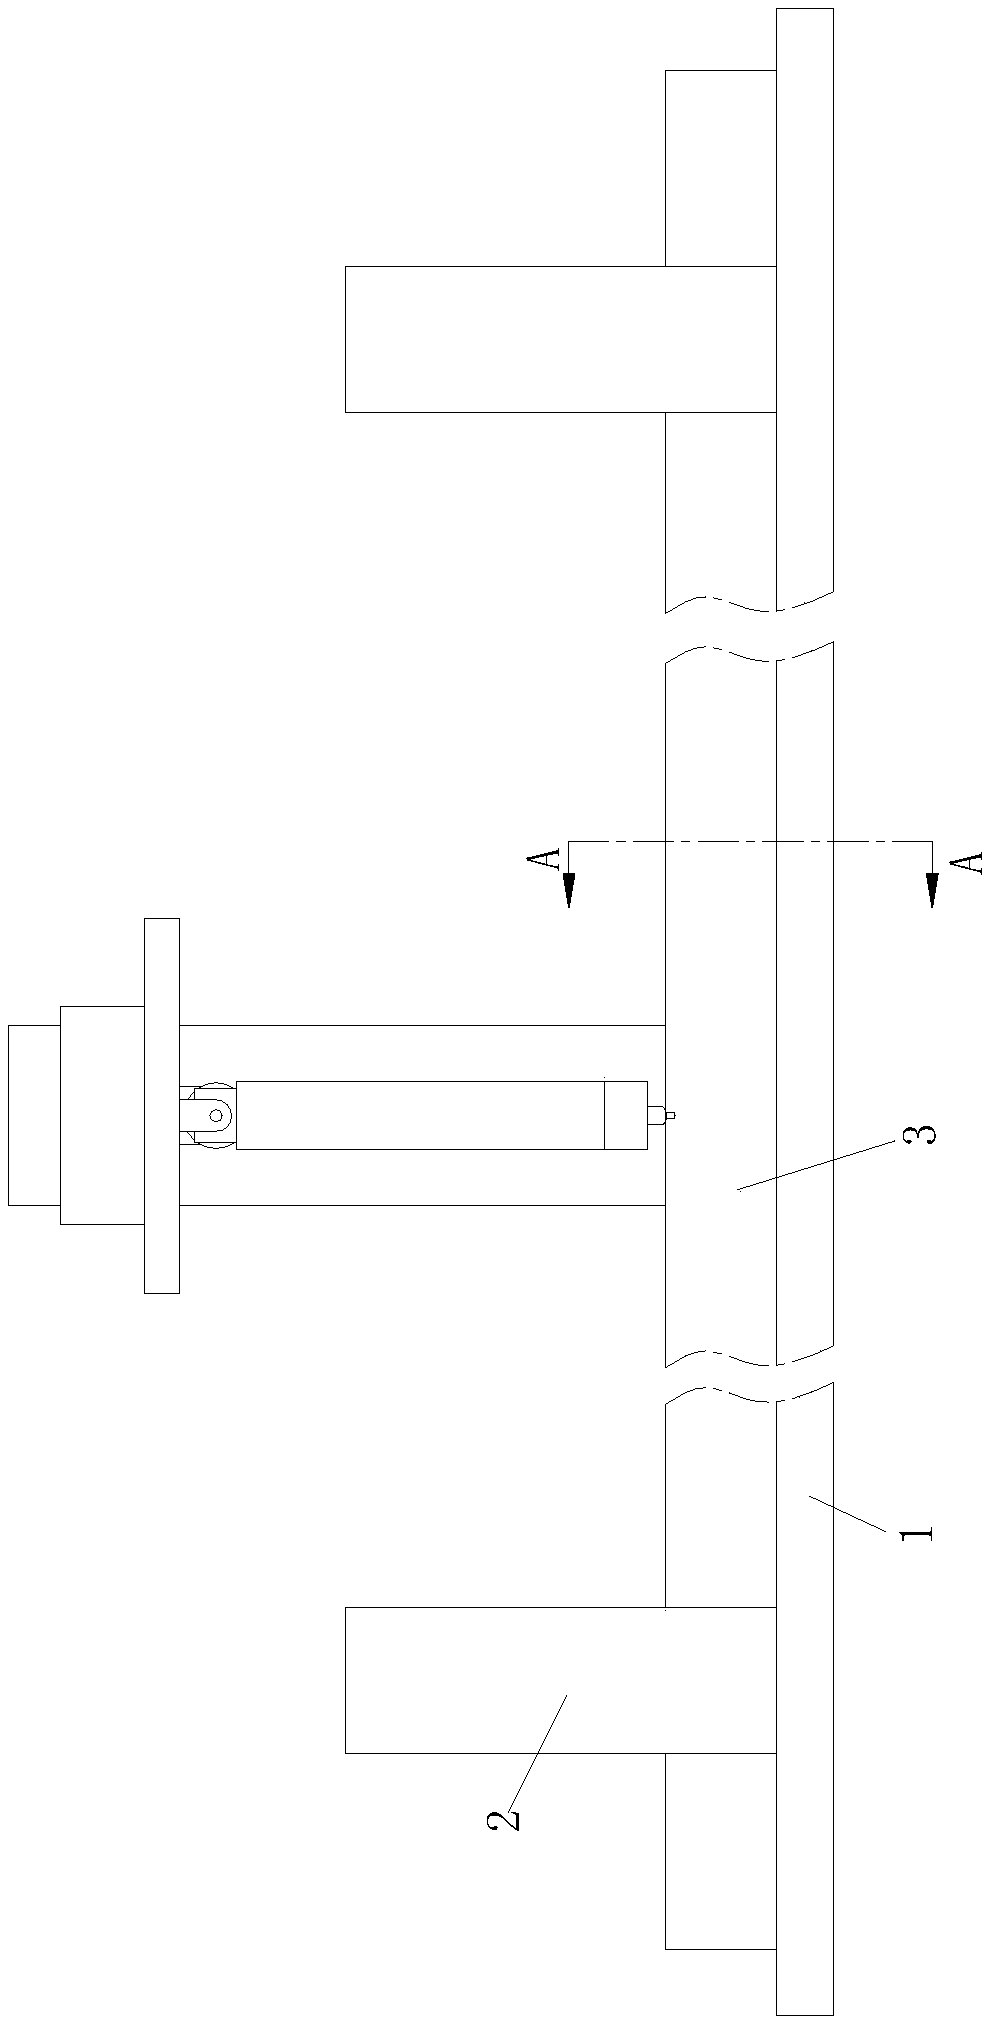 Symmetrical type welding device for H-shaped steel forming and processing